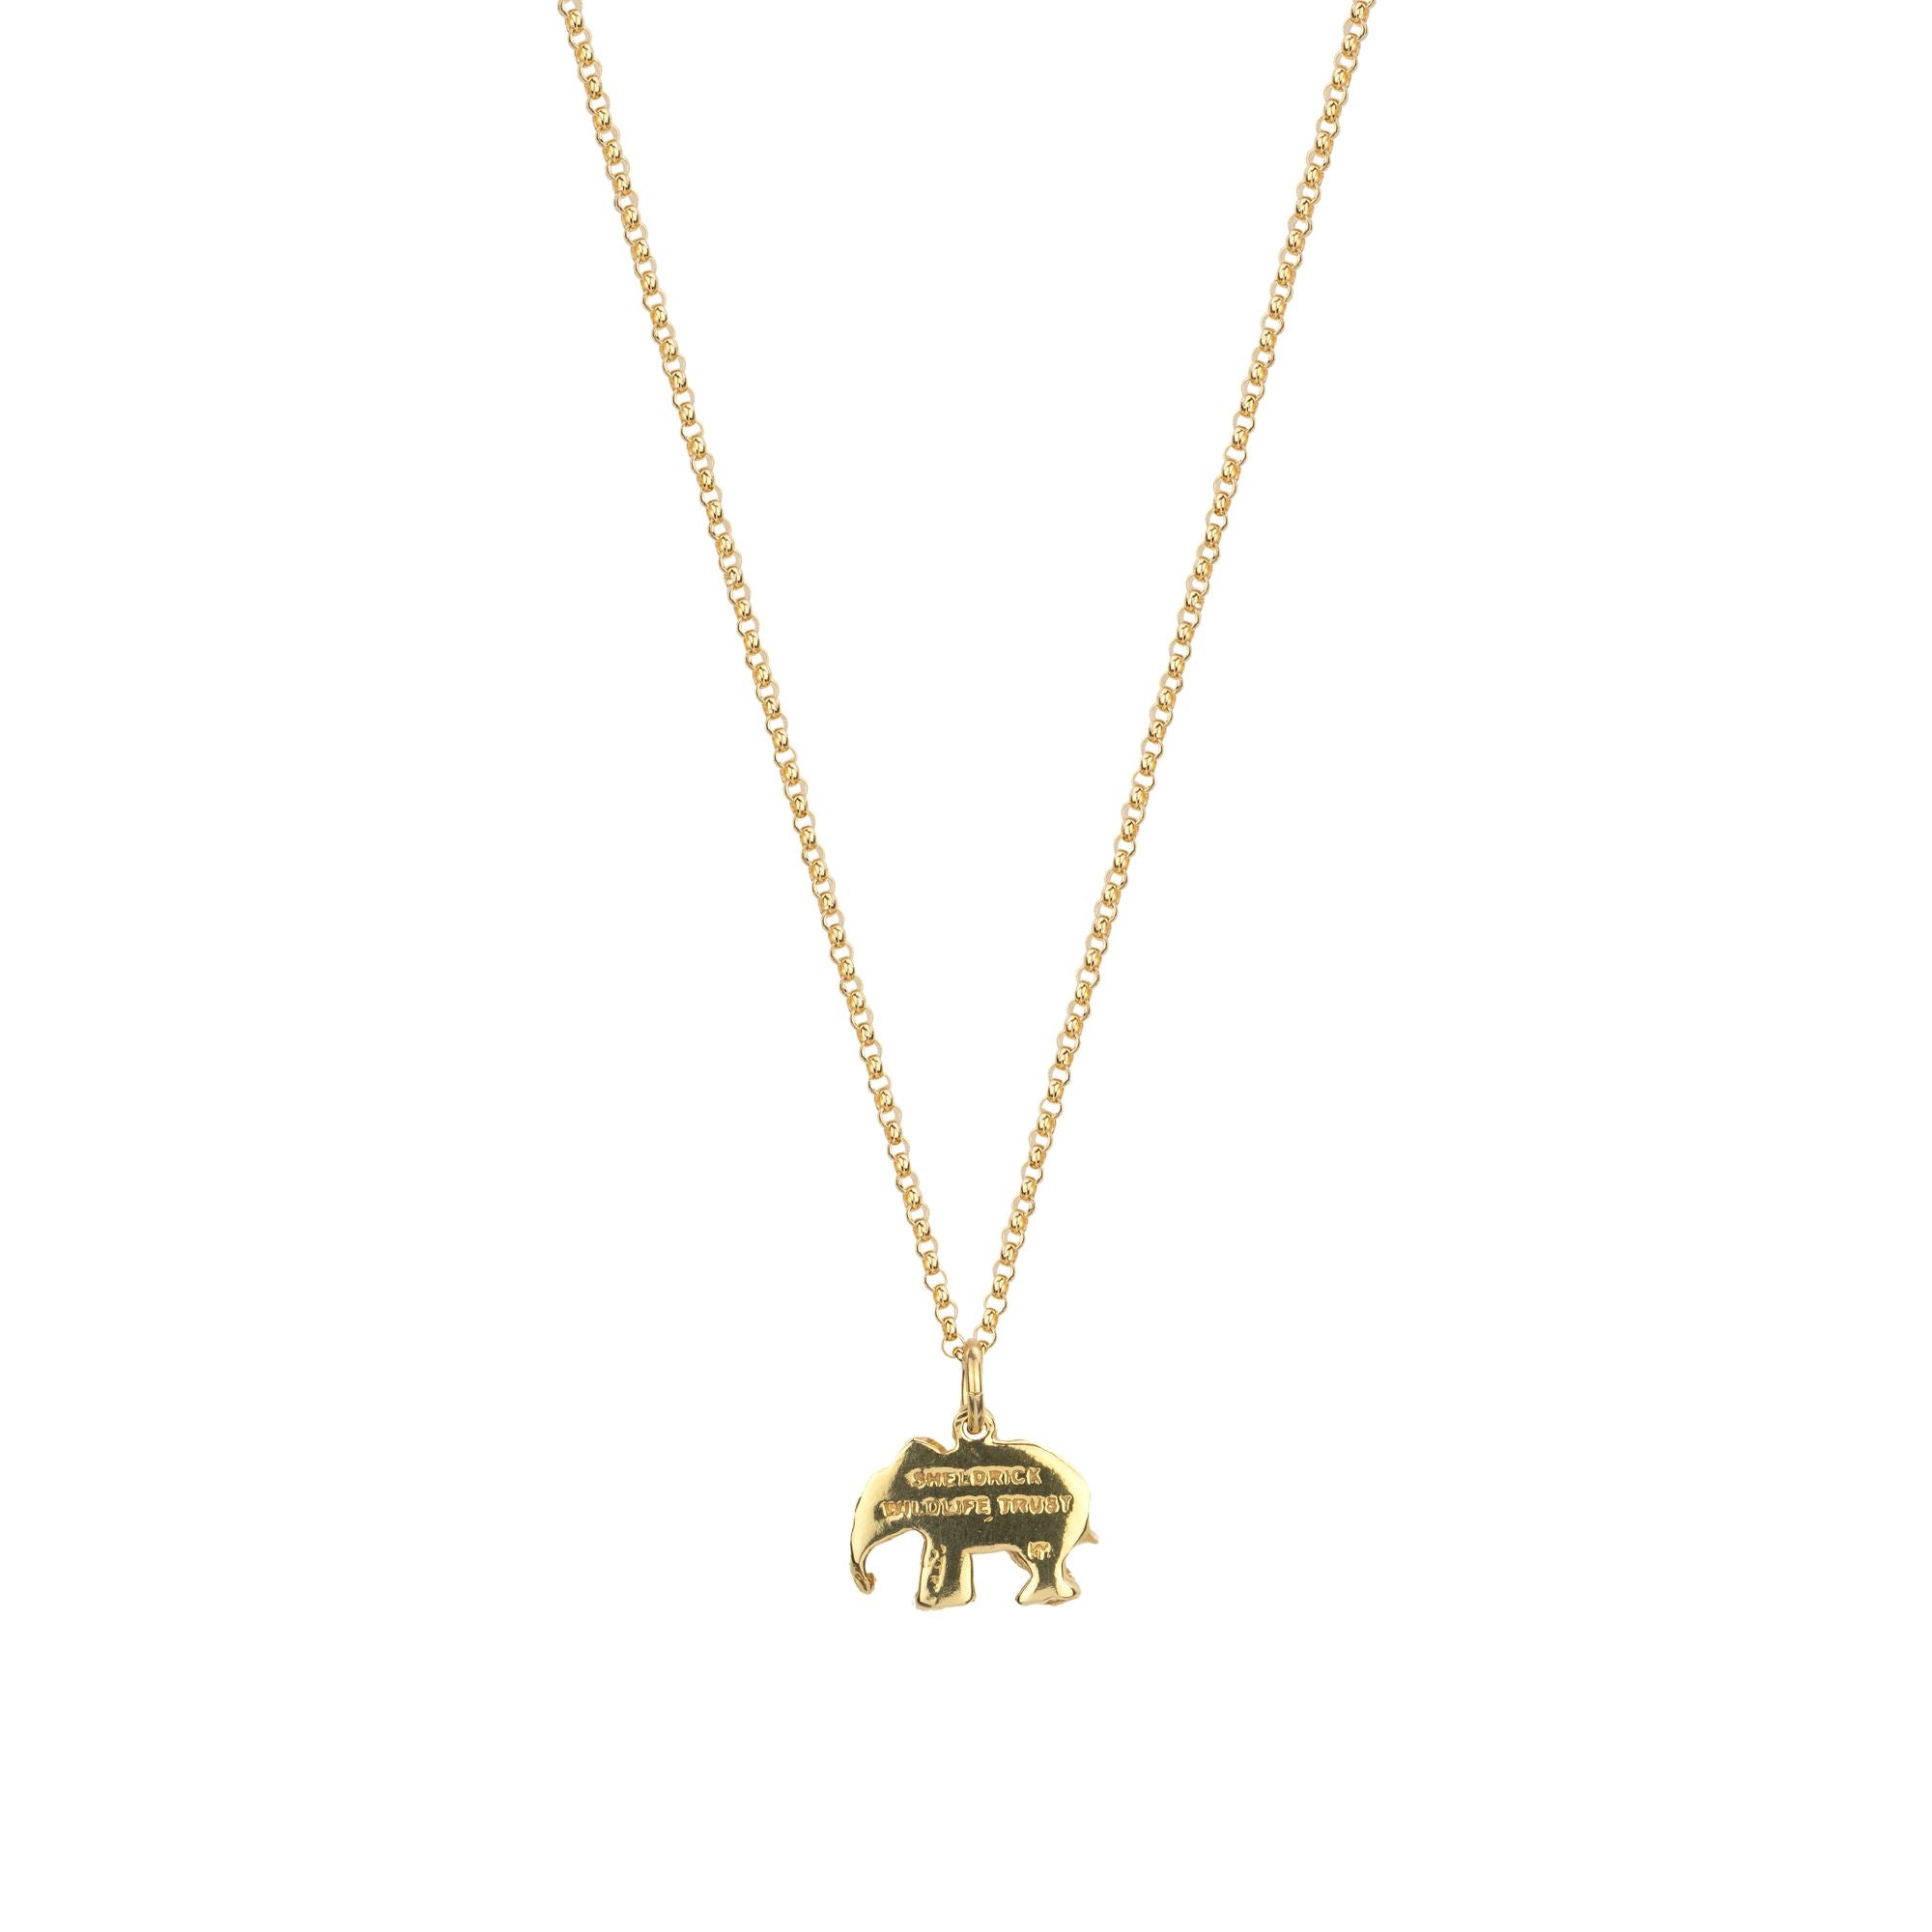 Gold Plated Elephant Charm Necklace